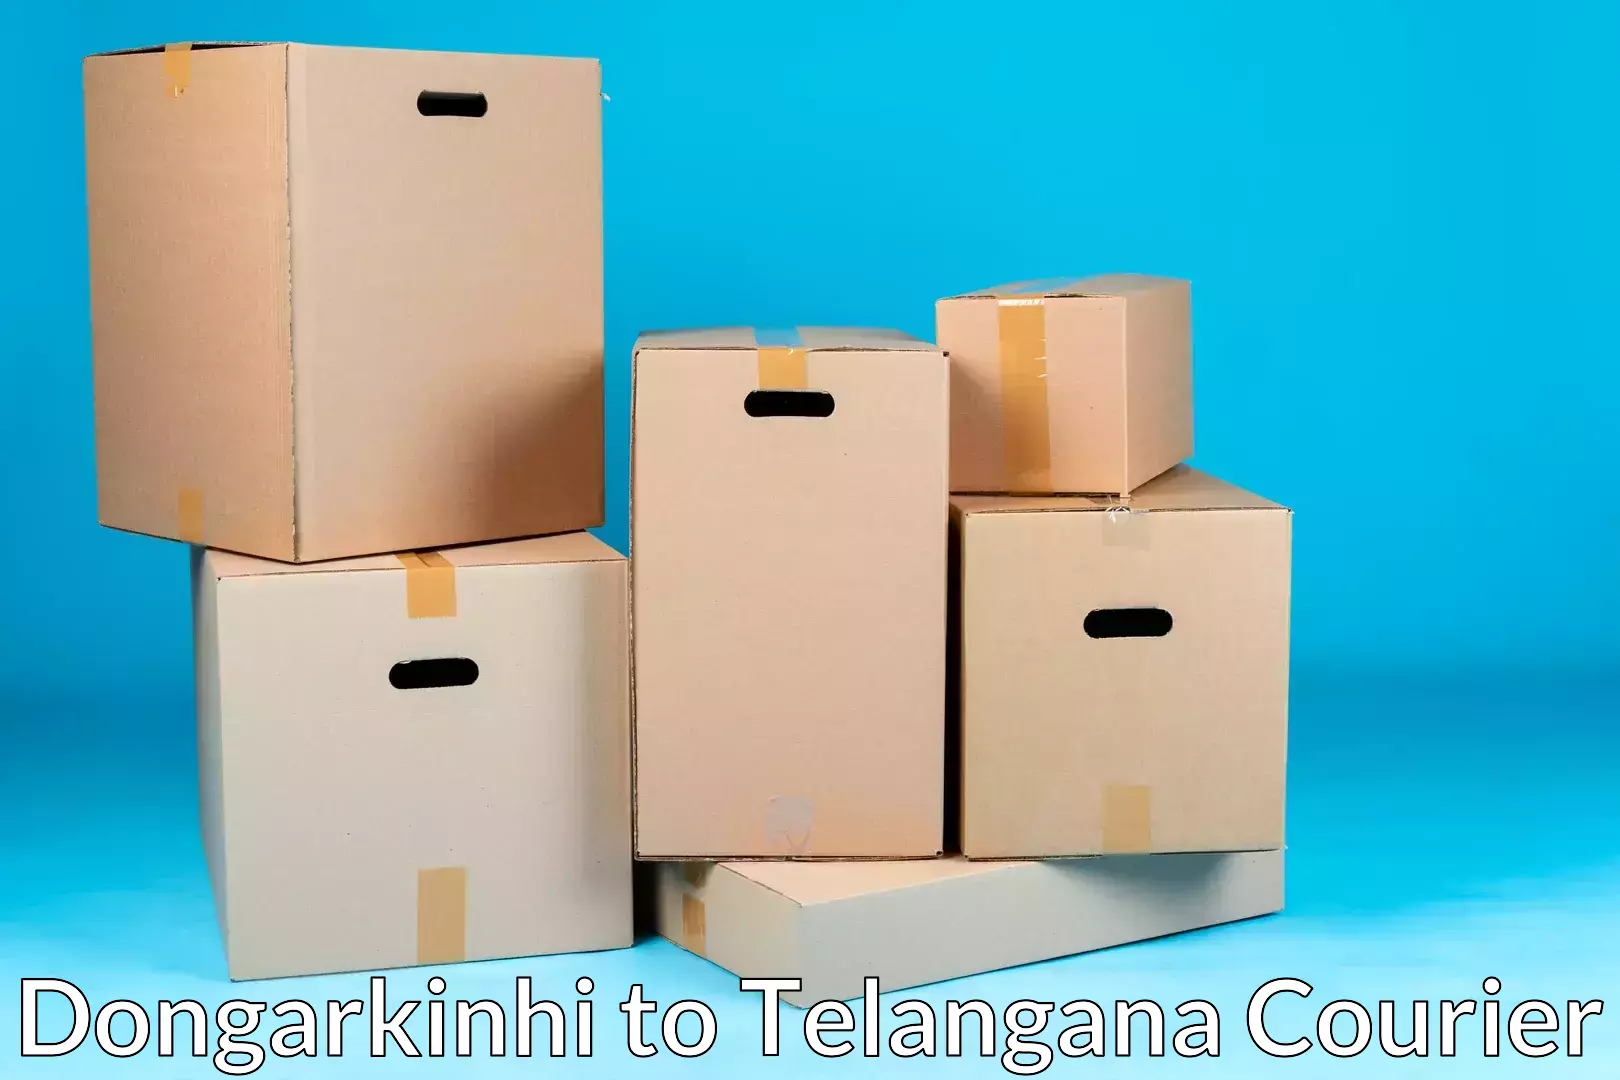 Quality moving services Dongarkinhi to Telangana